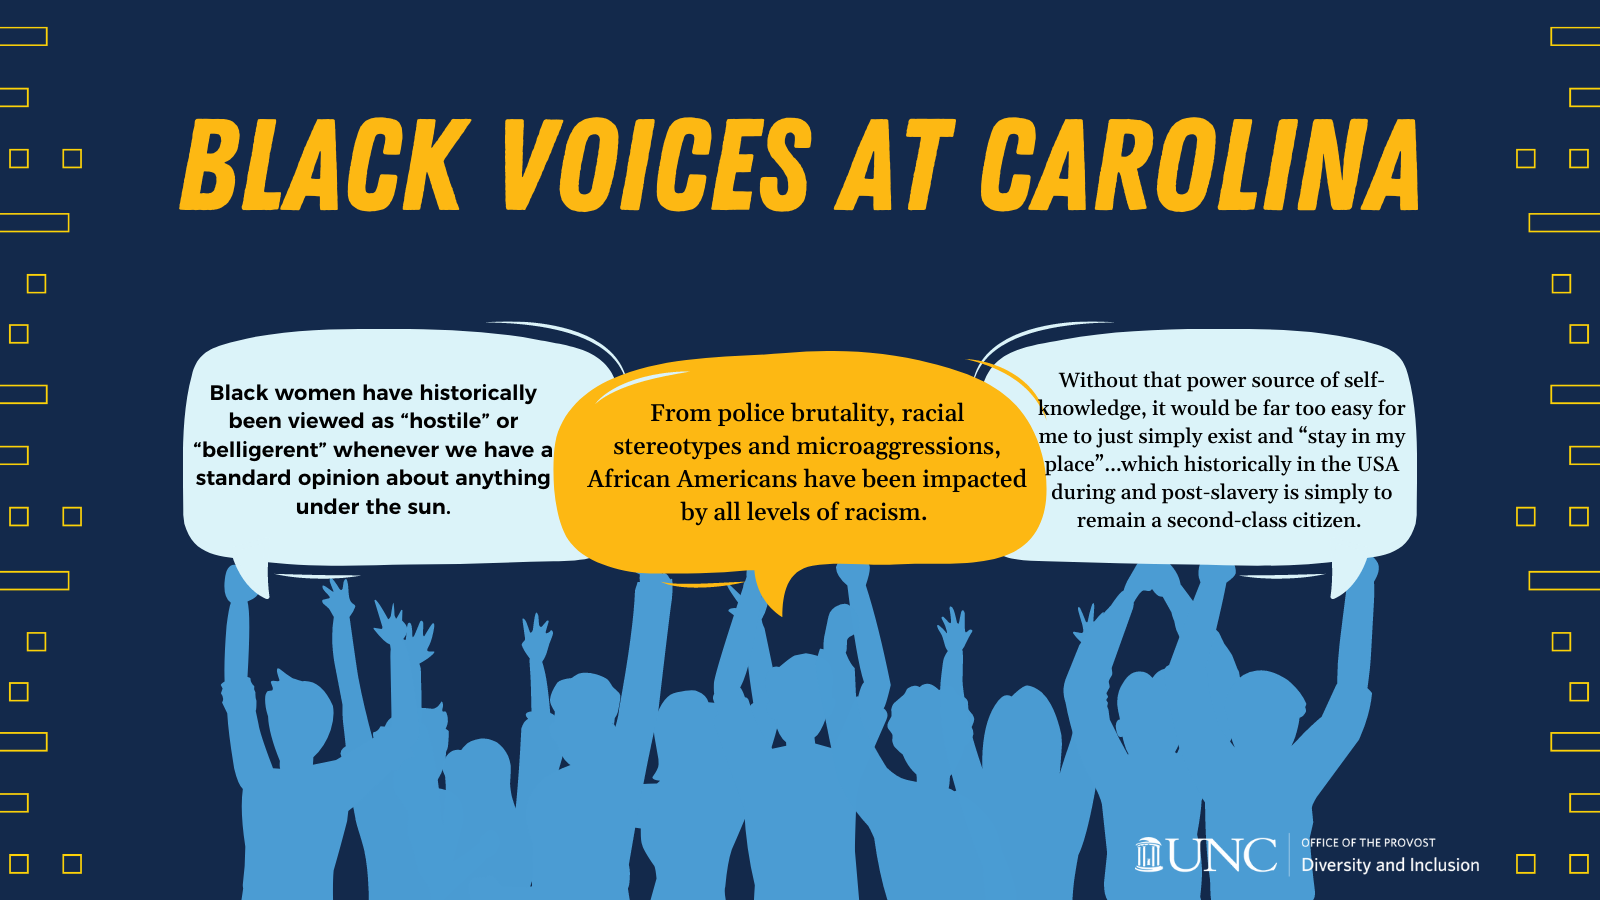 Image of people holding up voice bubbles with title that says, "Black Voices at Carolina" and voice bubbles that say, "Black women have historically been viewed as 'hostile' or 'belligerent' whenever we have a standard opinion about anything under the sun," "From police brutality, racial stereotypes and microaggressions, African Americans have been impacted by all levels of racism," and "Without that power source of self-knowledge, it would be far too easy for me to just simply exist and 'stay in my place'...which historically in the USA during and post-slavery is simply to remain a second-class citizen."